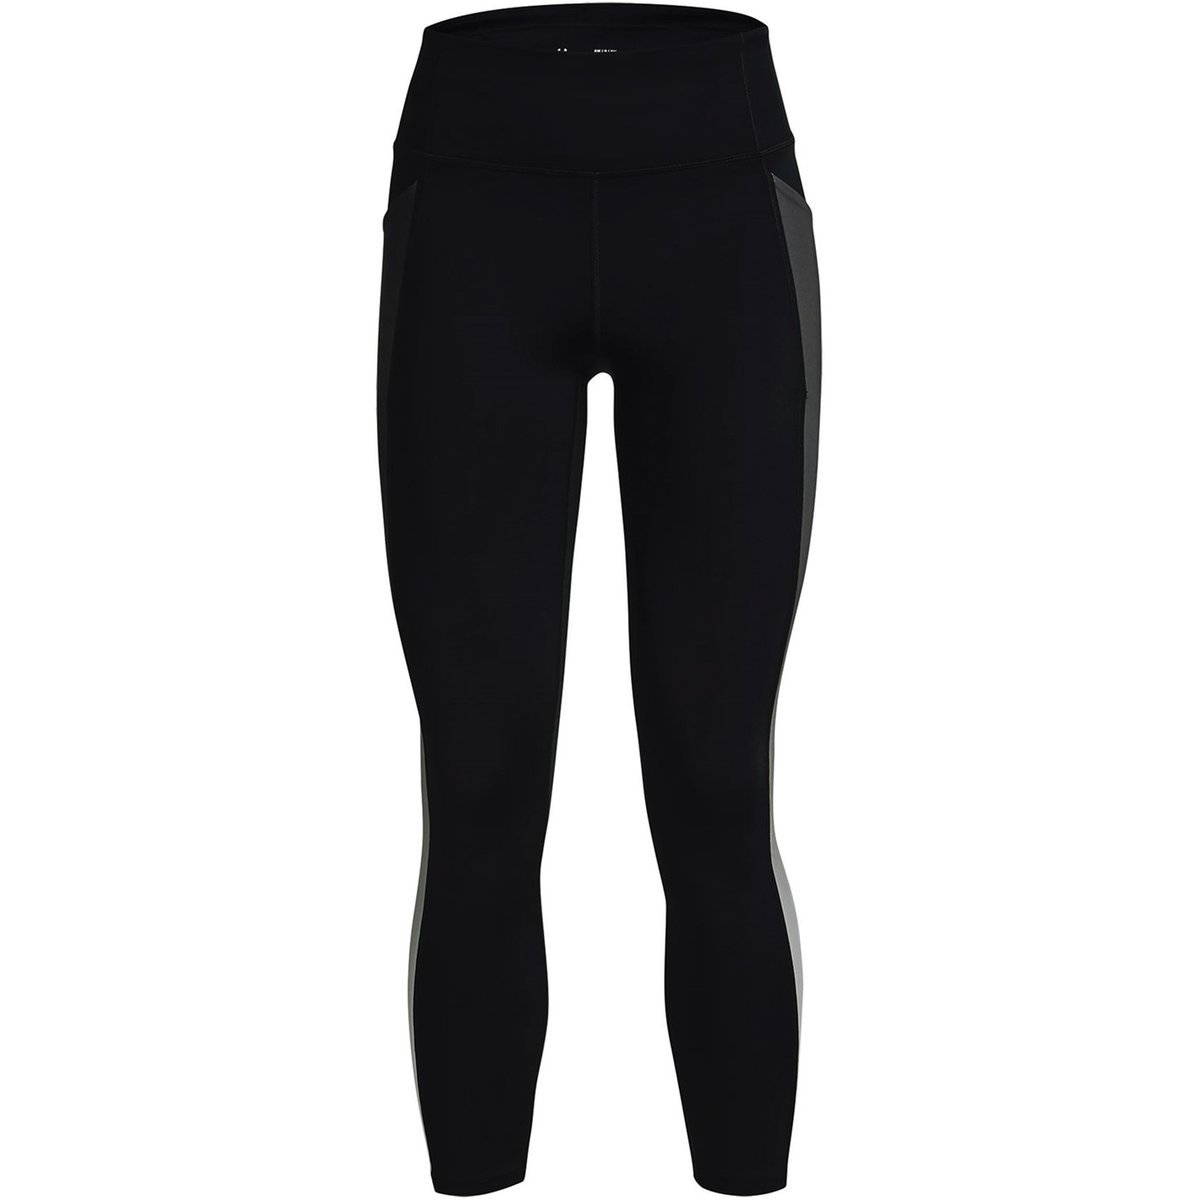  Under Armour Men's Speedpocket Tights, Black (001)/Neptune,  Small : Clothing, Shoes & Jewelry